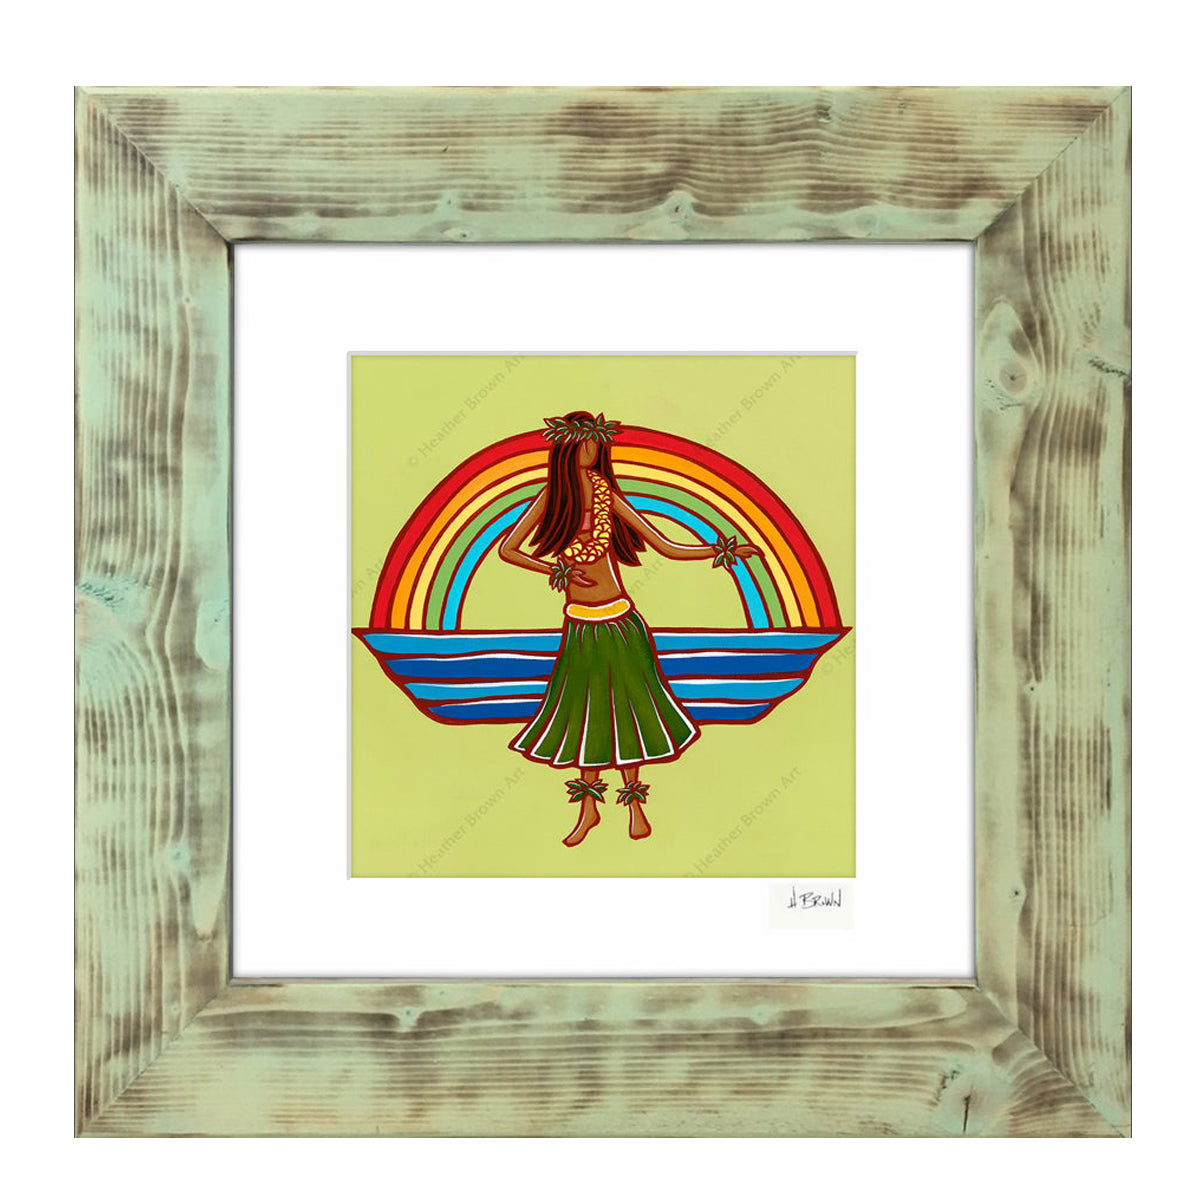 Hula - Framed Matted Print by Heather Brown